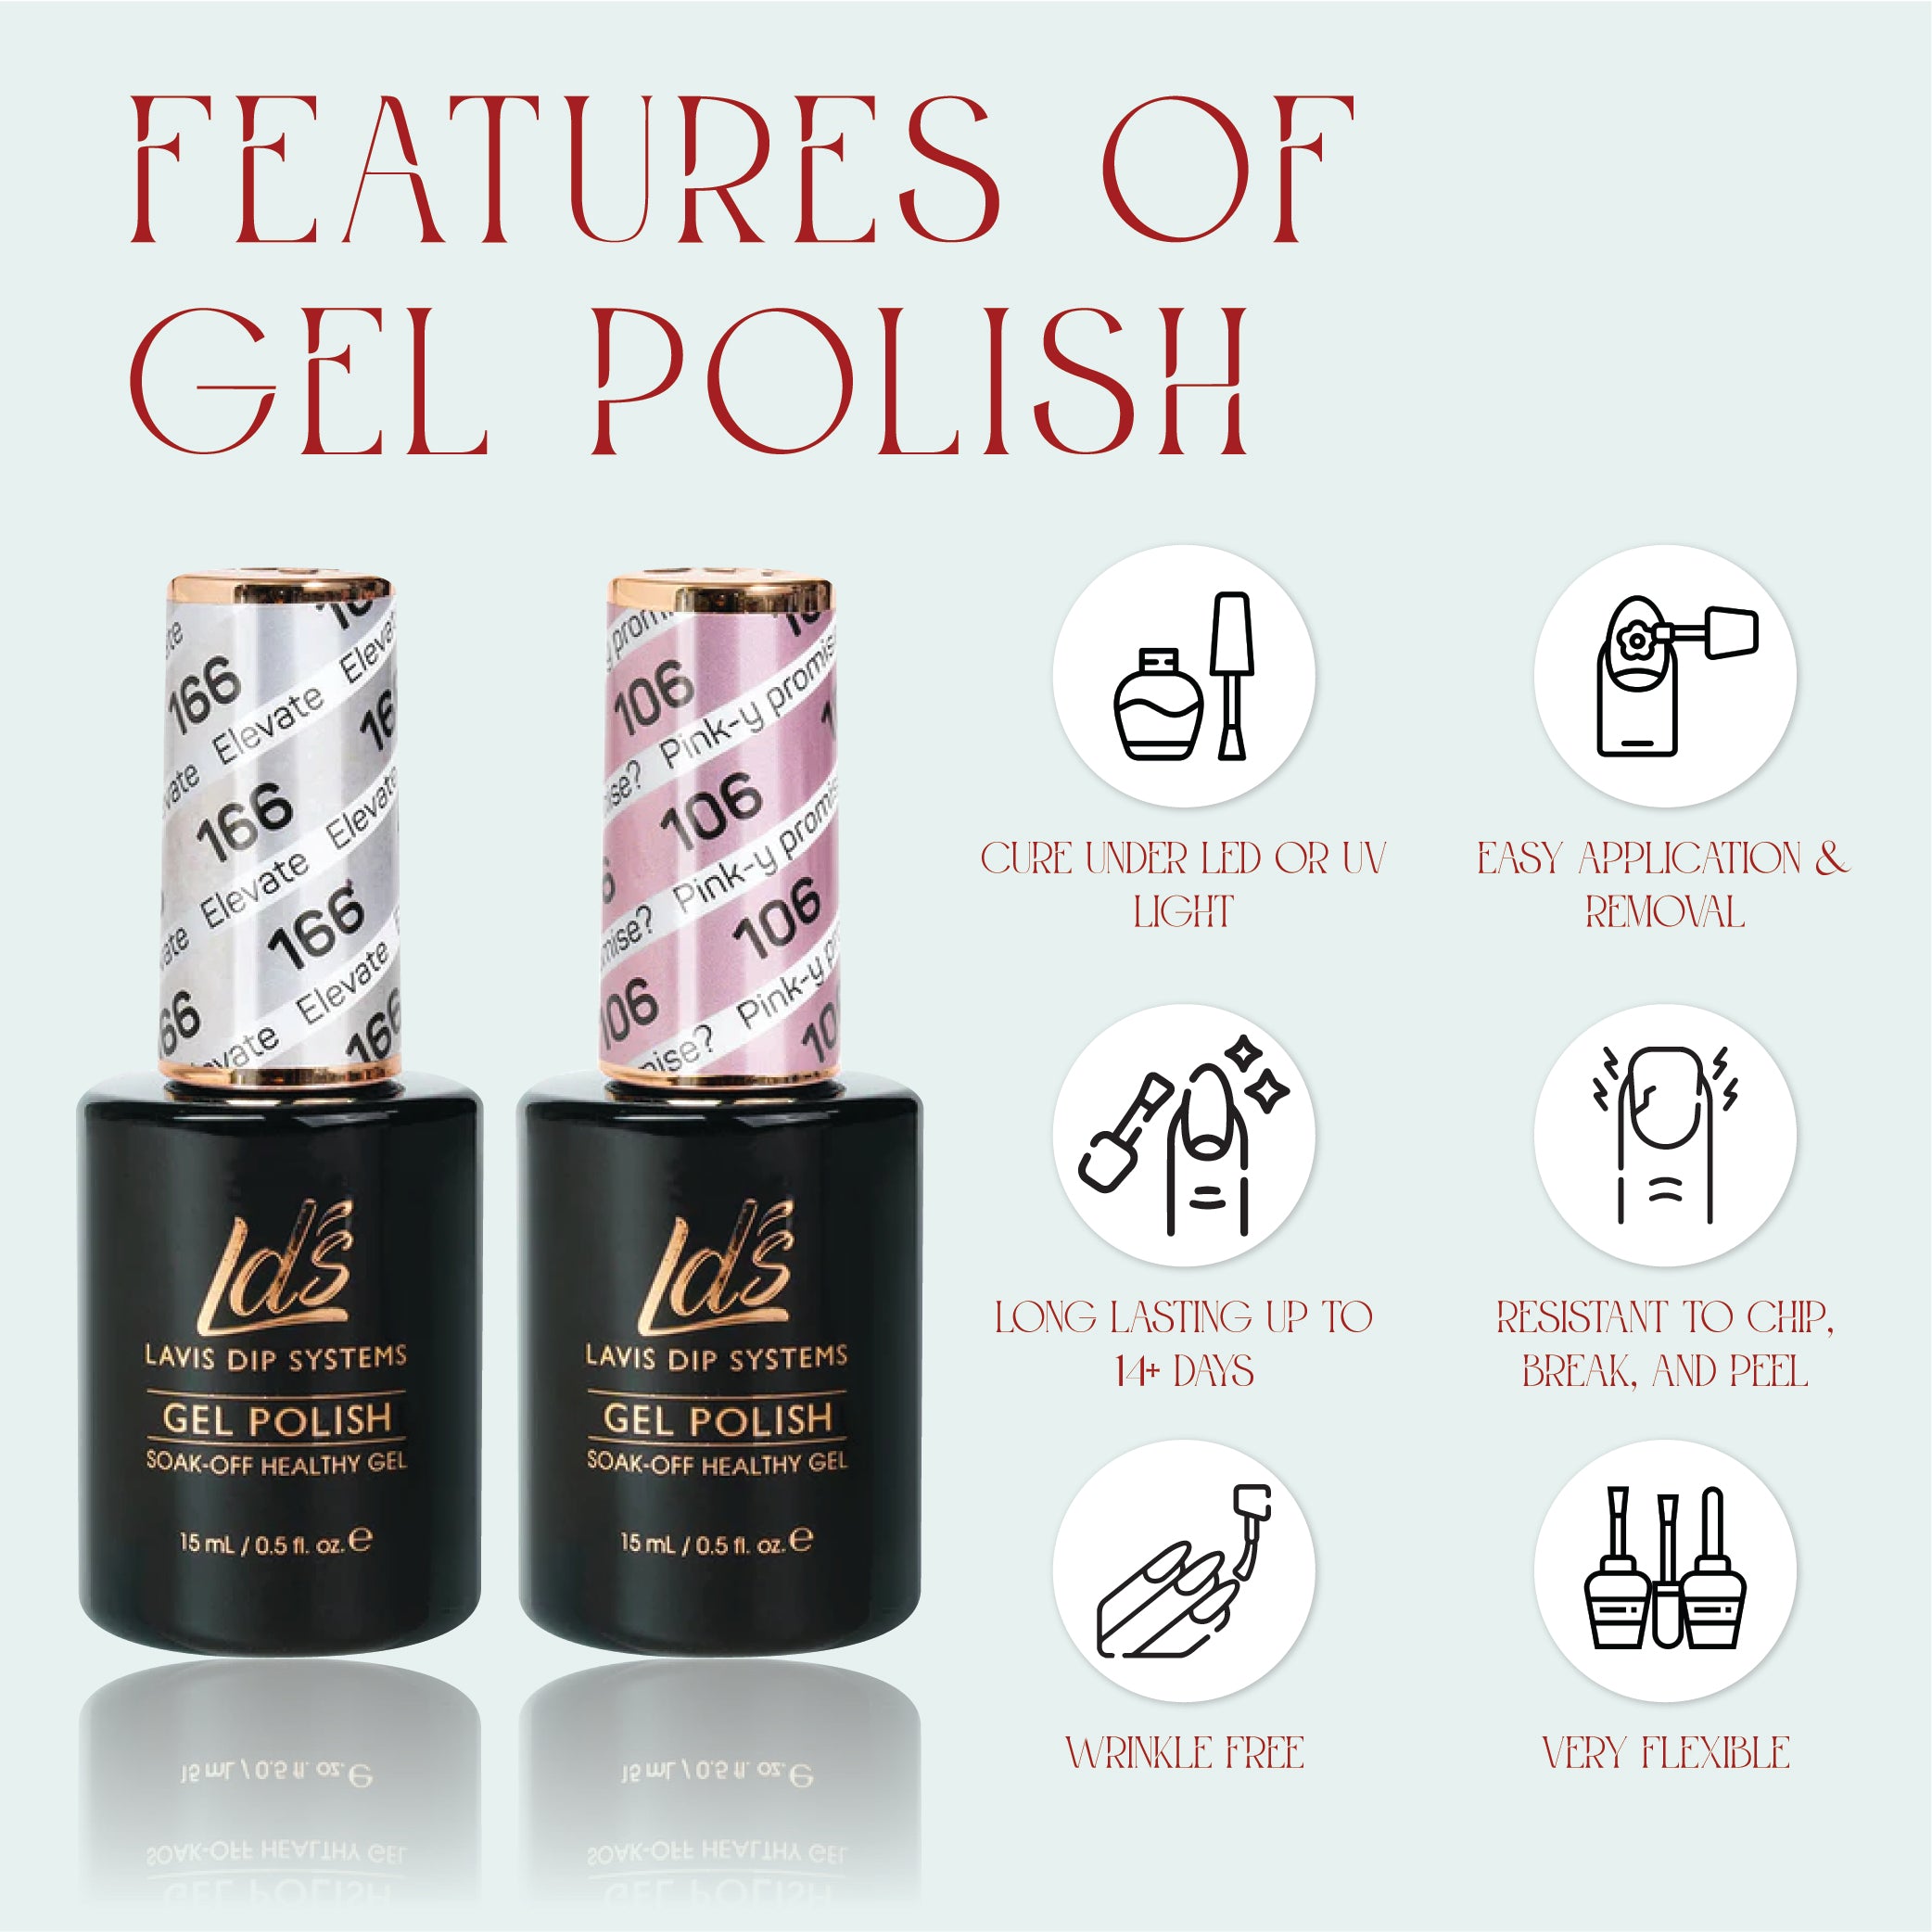 LDS Gel Nail Polish Duo - 054 Neutral, Beige Colors - Limited Editon